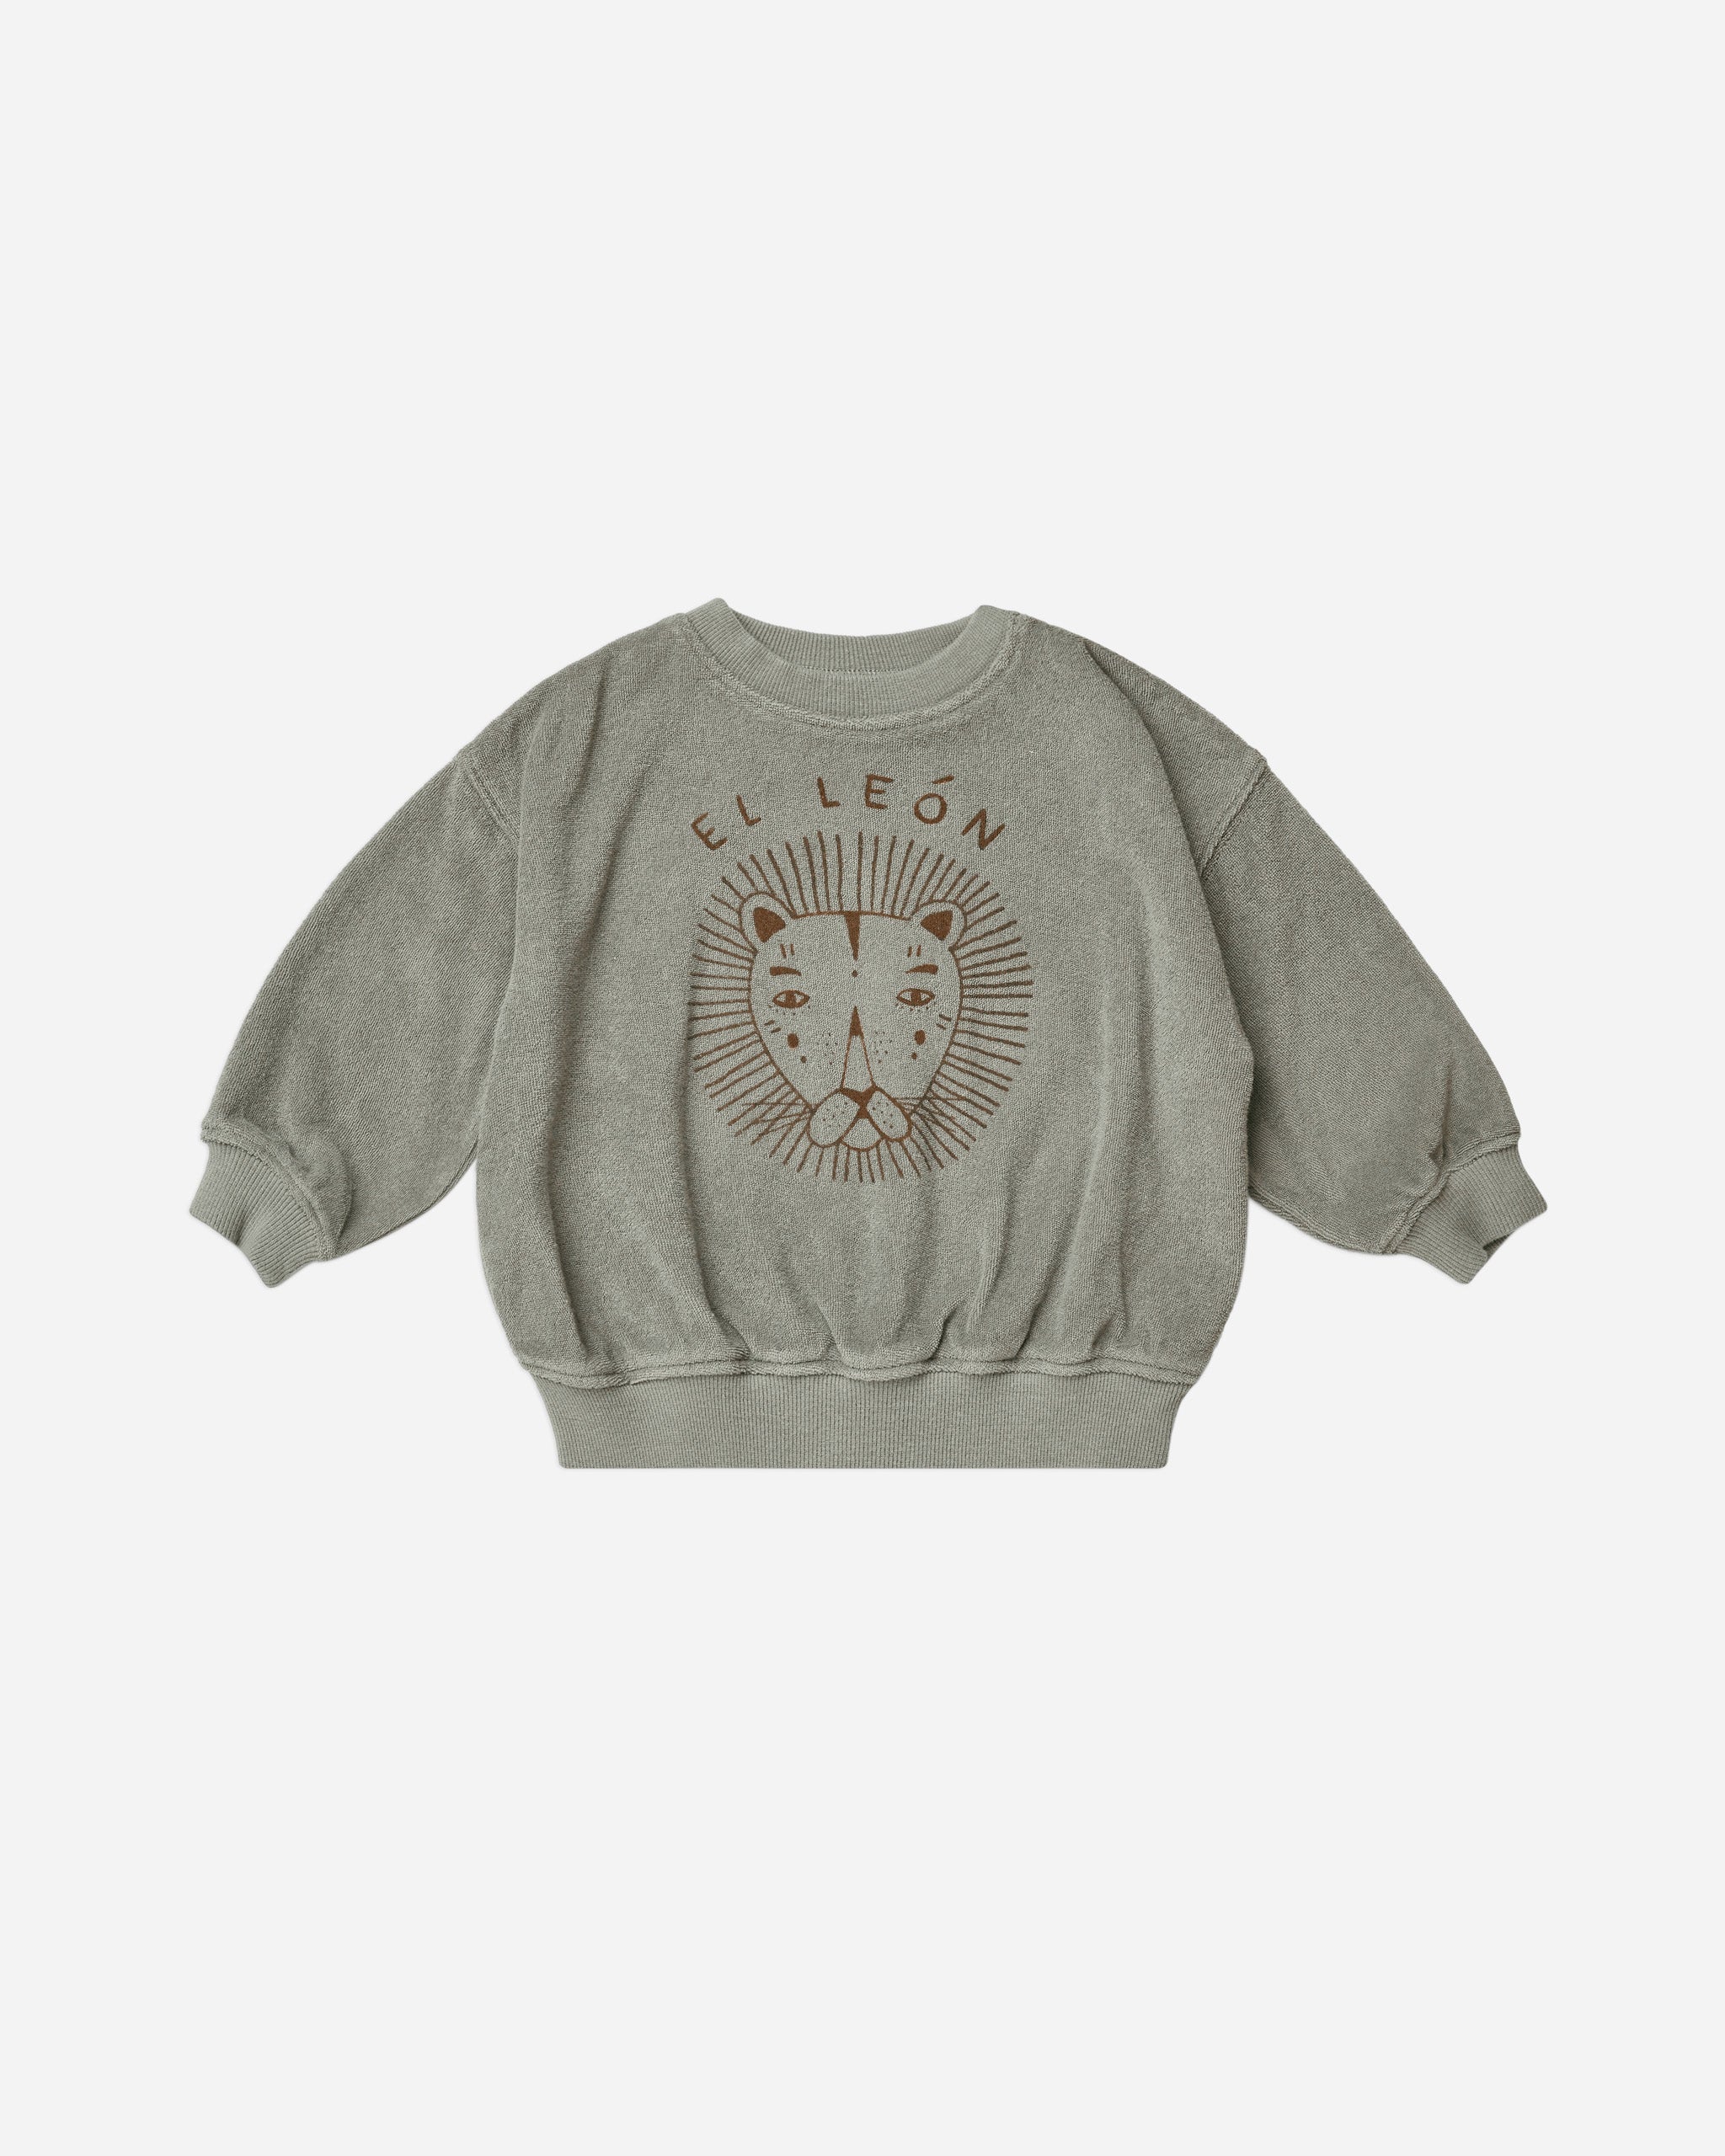 crew neck || el leon - Rylee + Cru | Kids Clothes | Trendy Baby Clothes | Modern Infant Outfits |